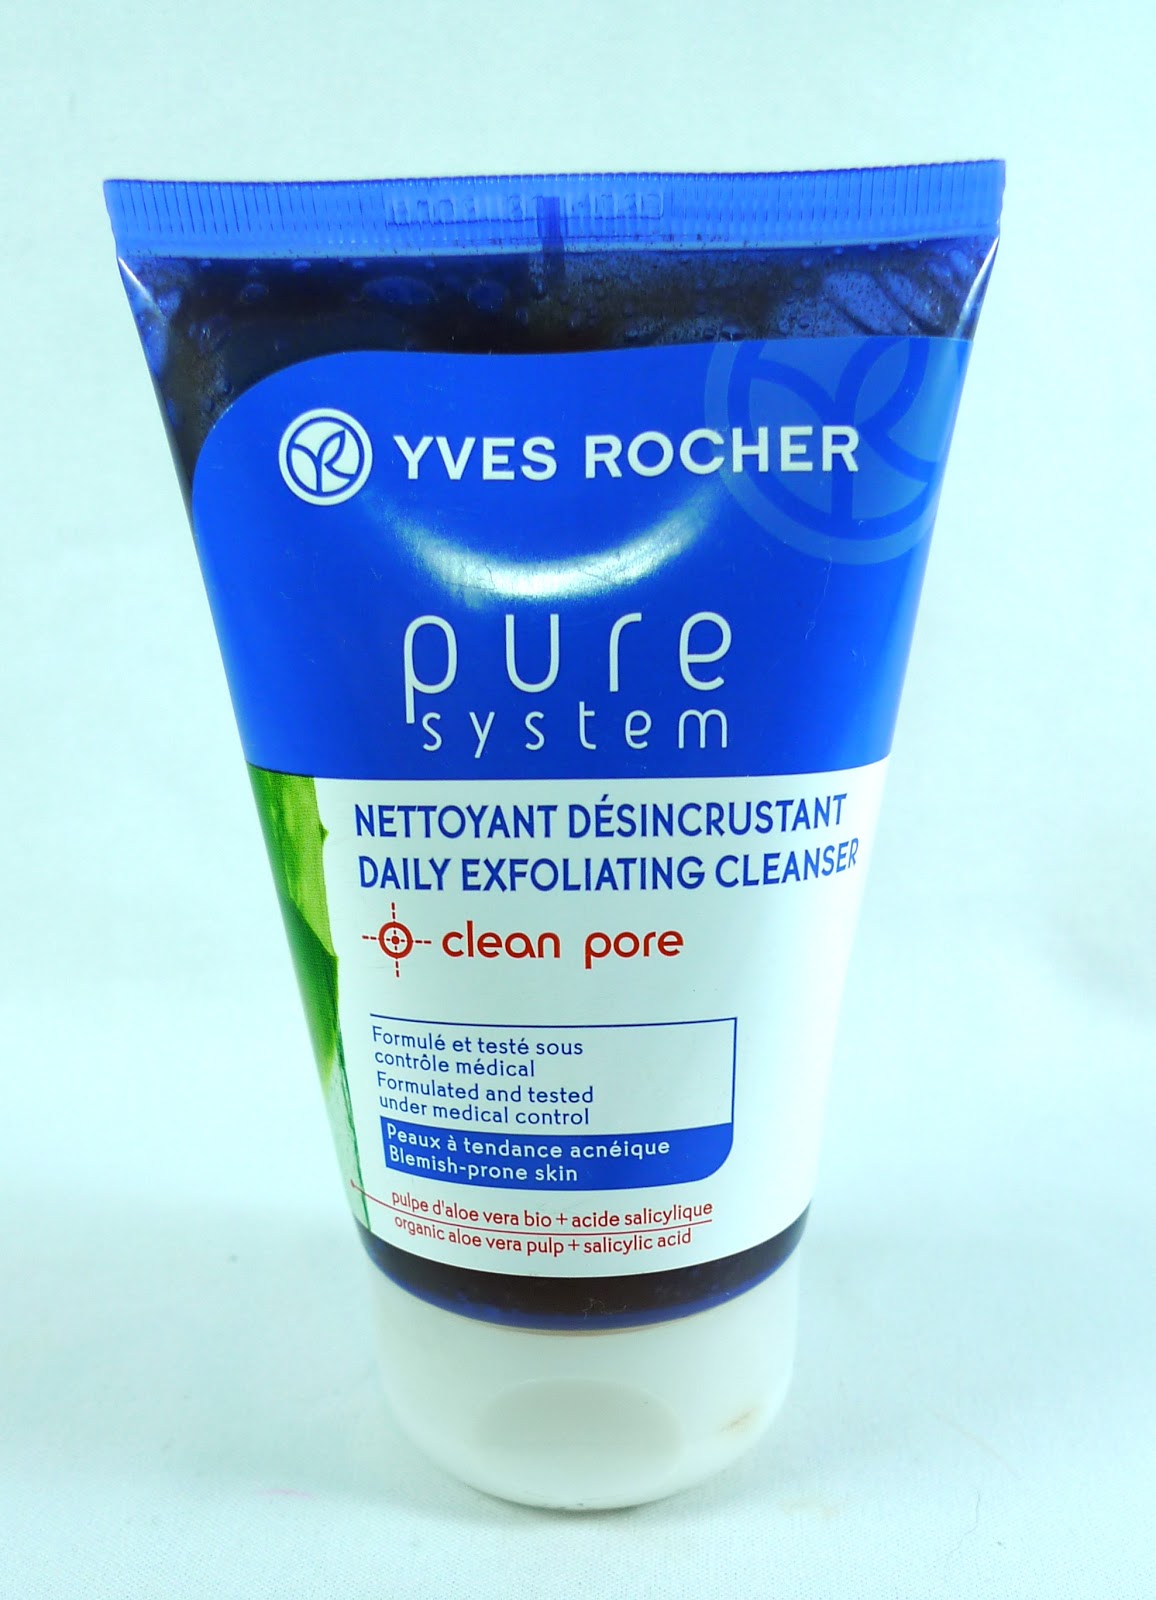 Collective Review Yves Rocher Pure System Line The Beauty Junkee